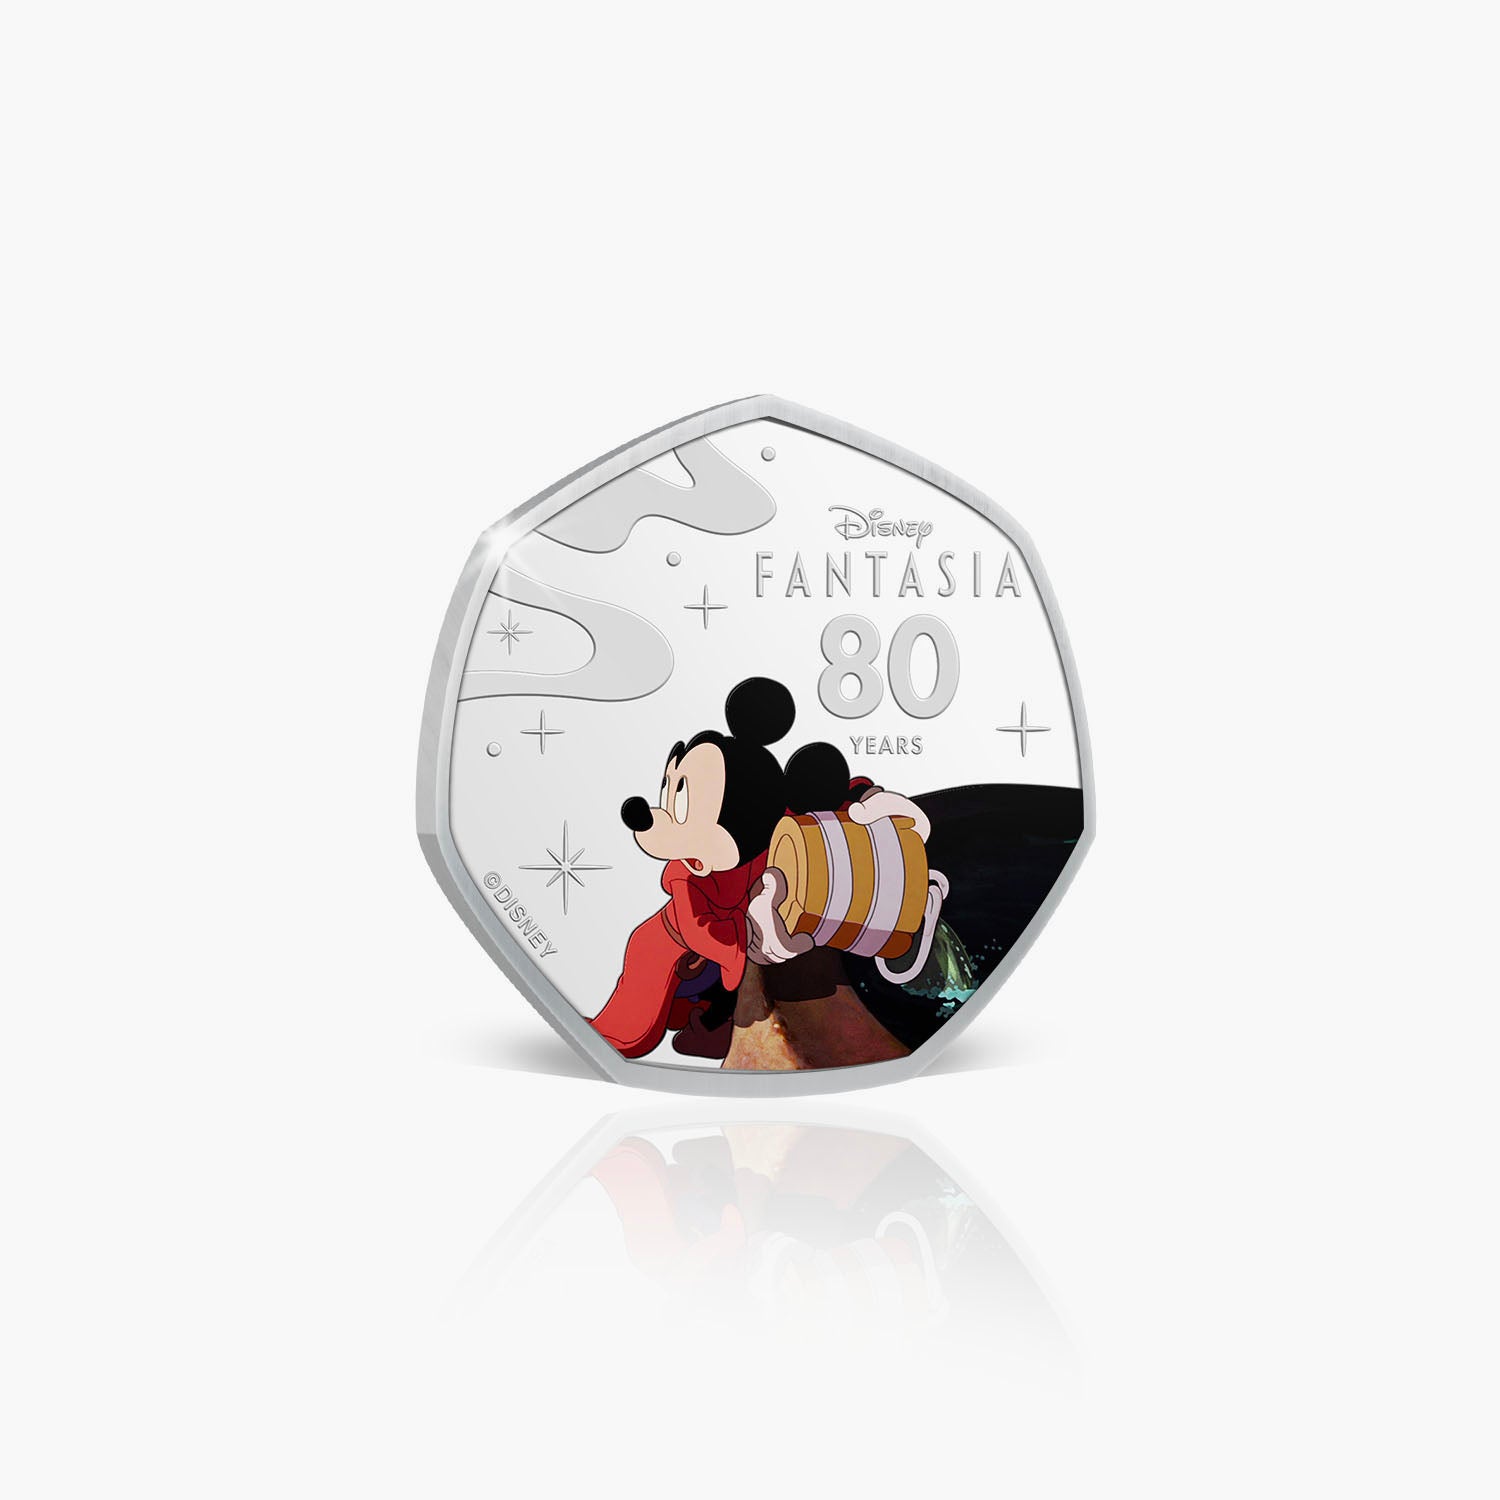 Chores Silver Plated Coin